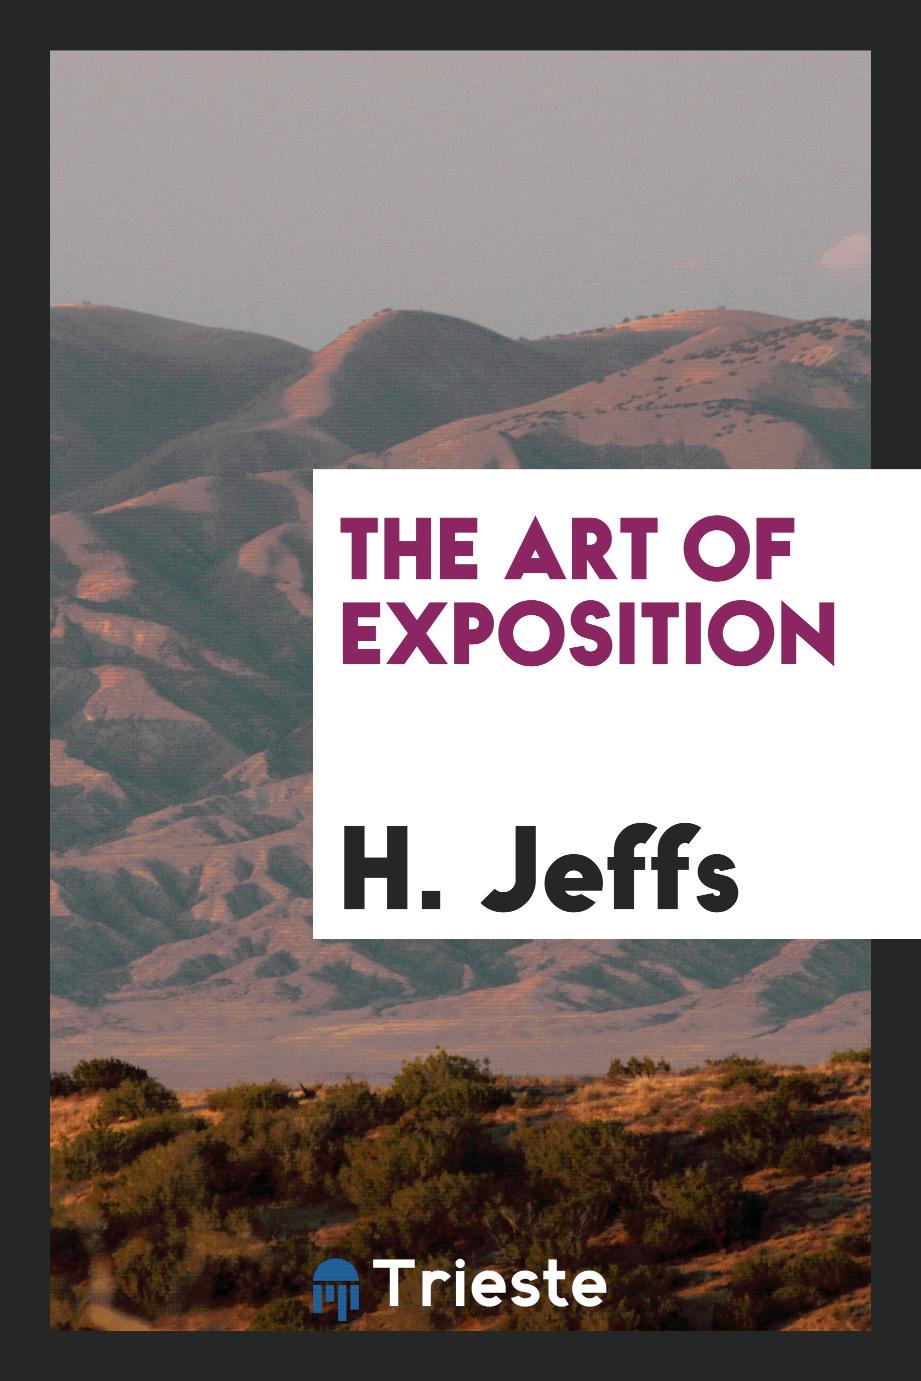 The art of exposition